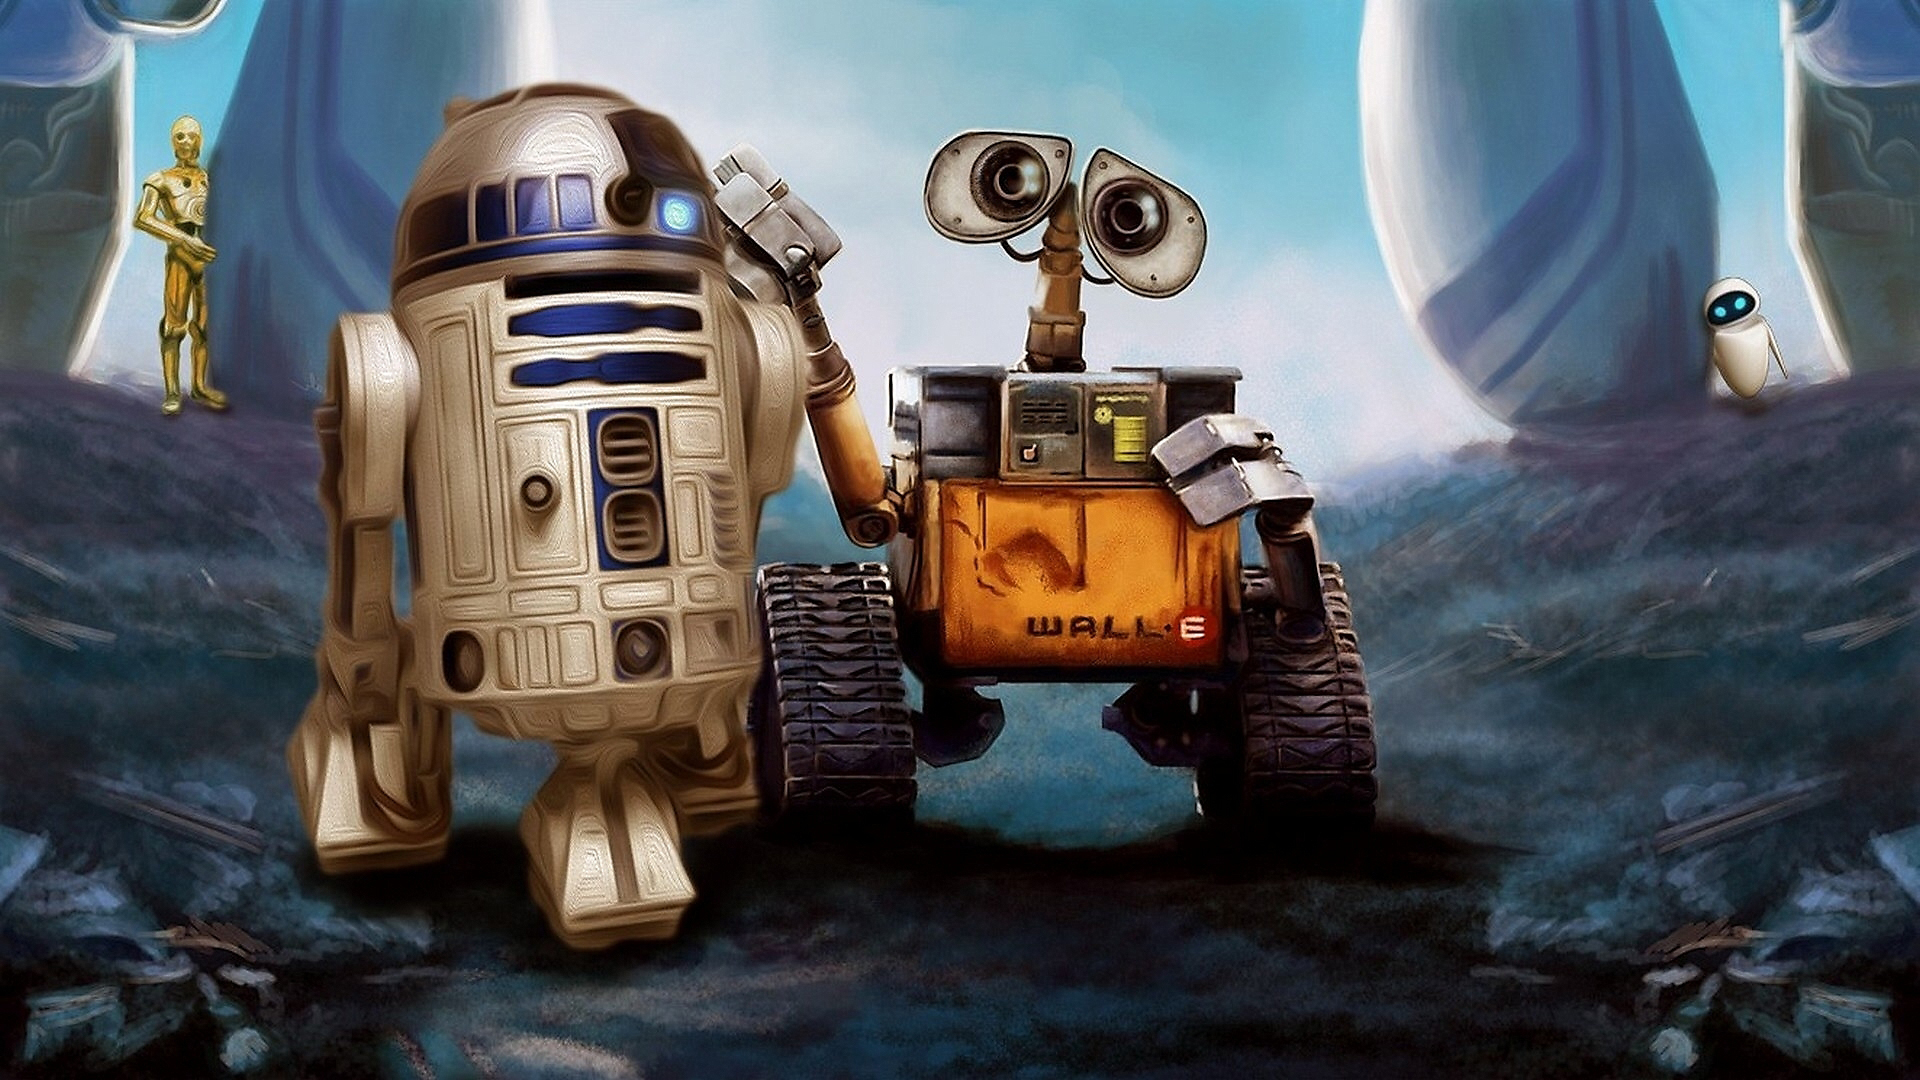 R2 D2 Wall E Character 1920x1080